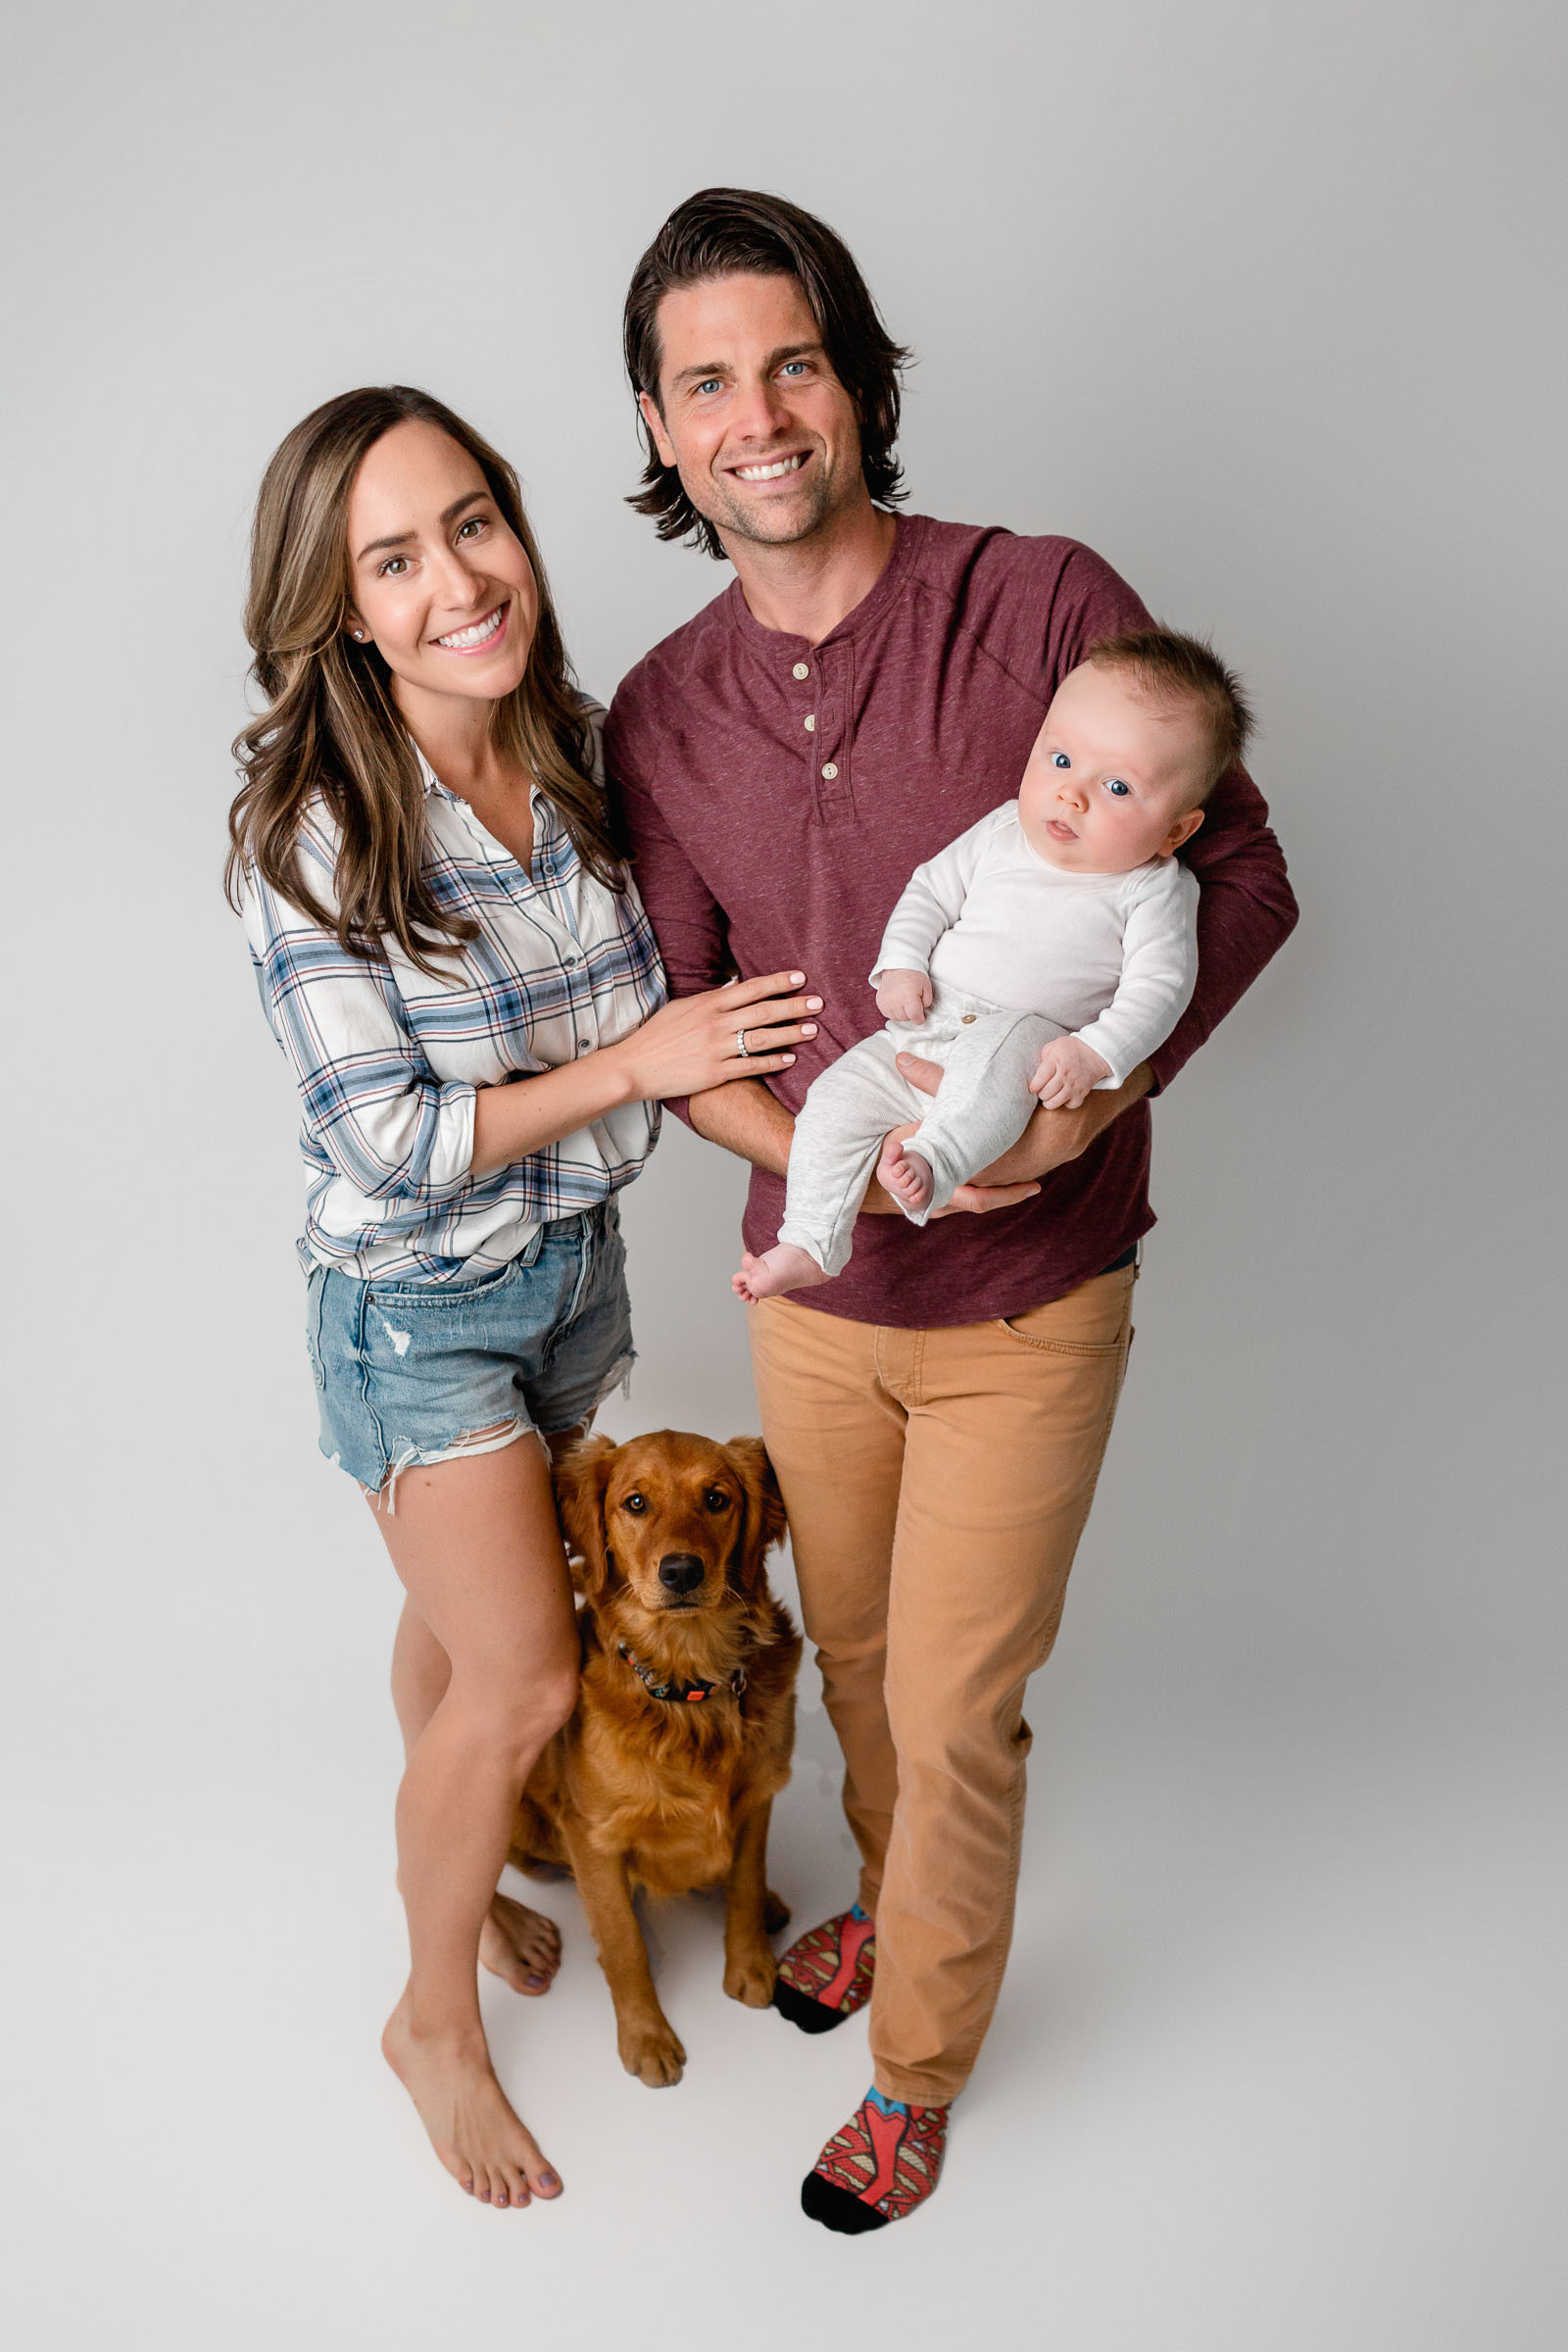 In Studio Family Photo on white backdrop with baby and golden retriever dog